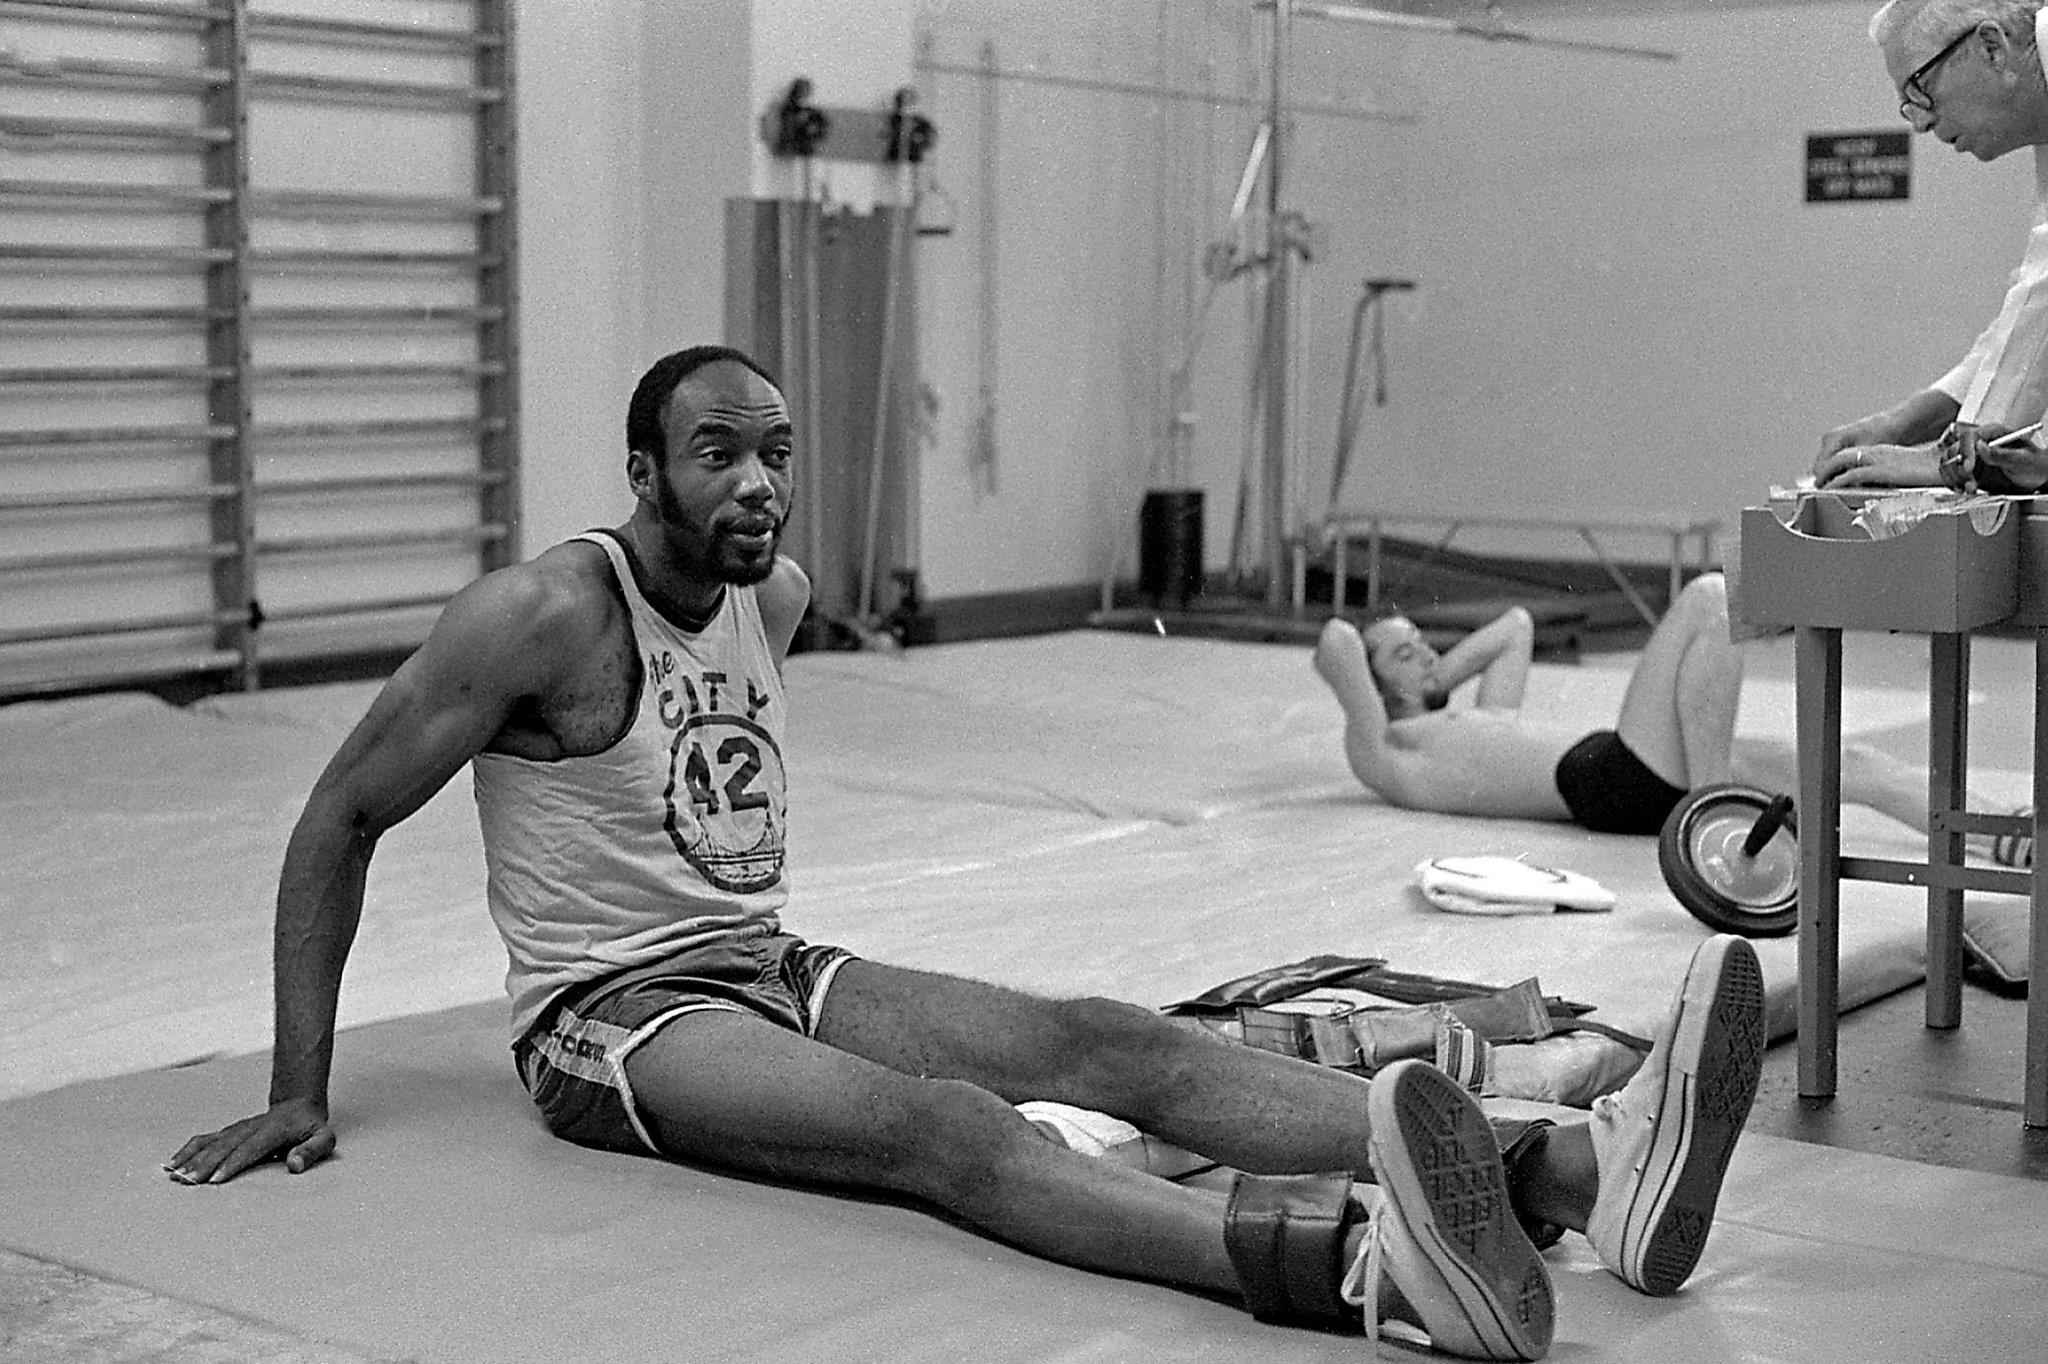 Tagged with Remembering Nate Thurmond